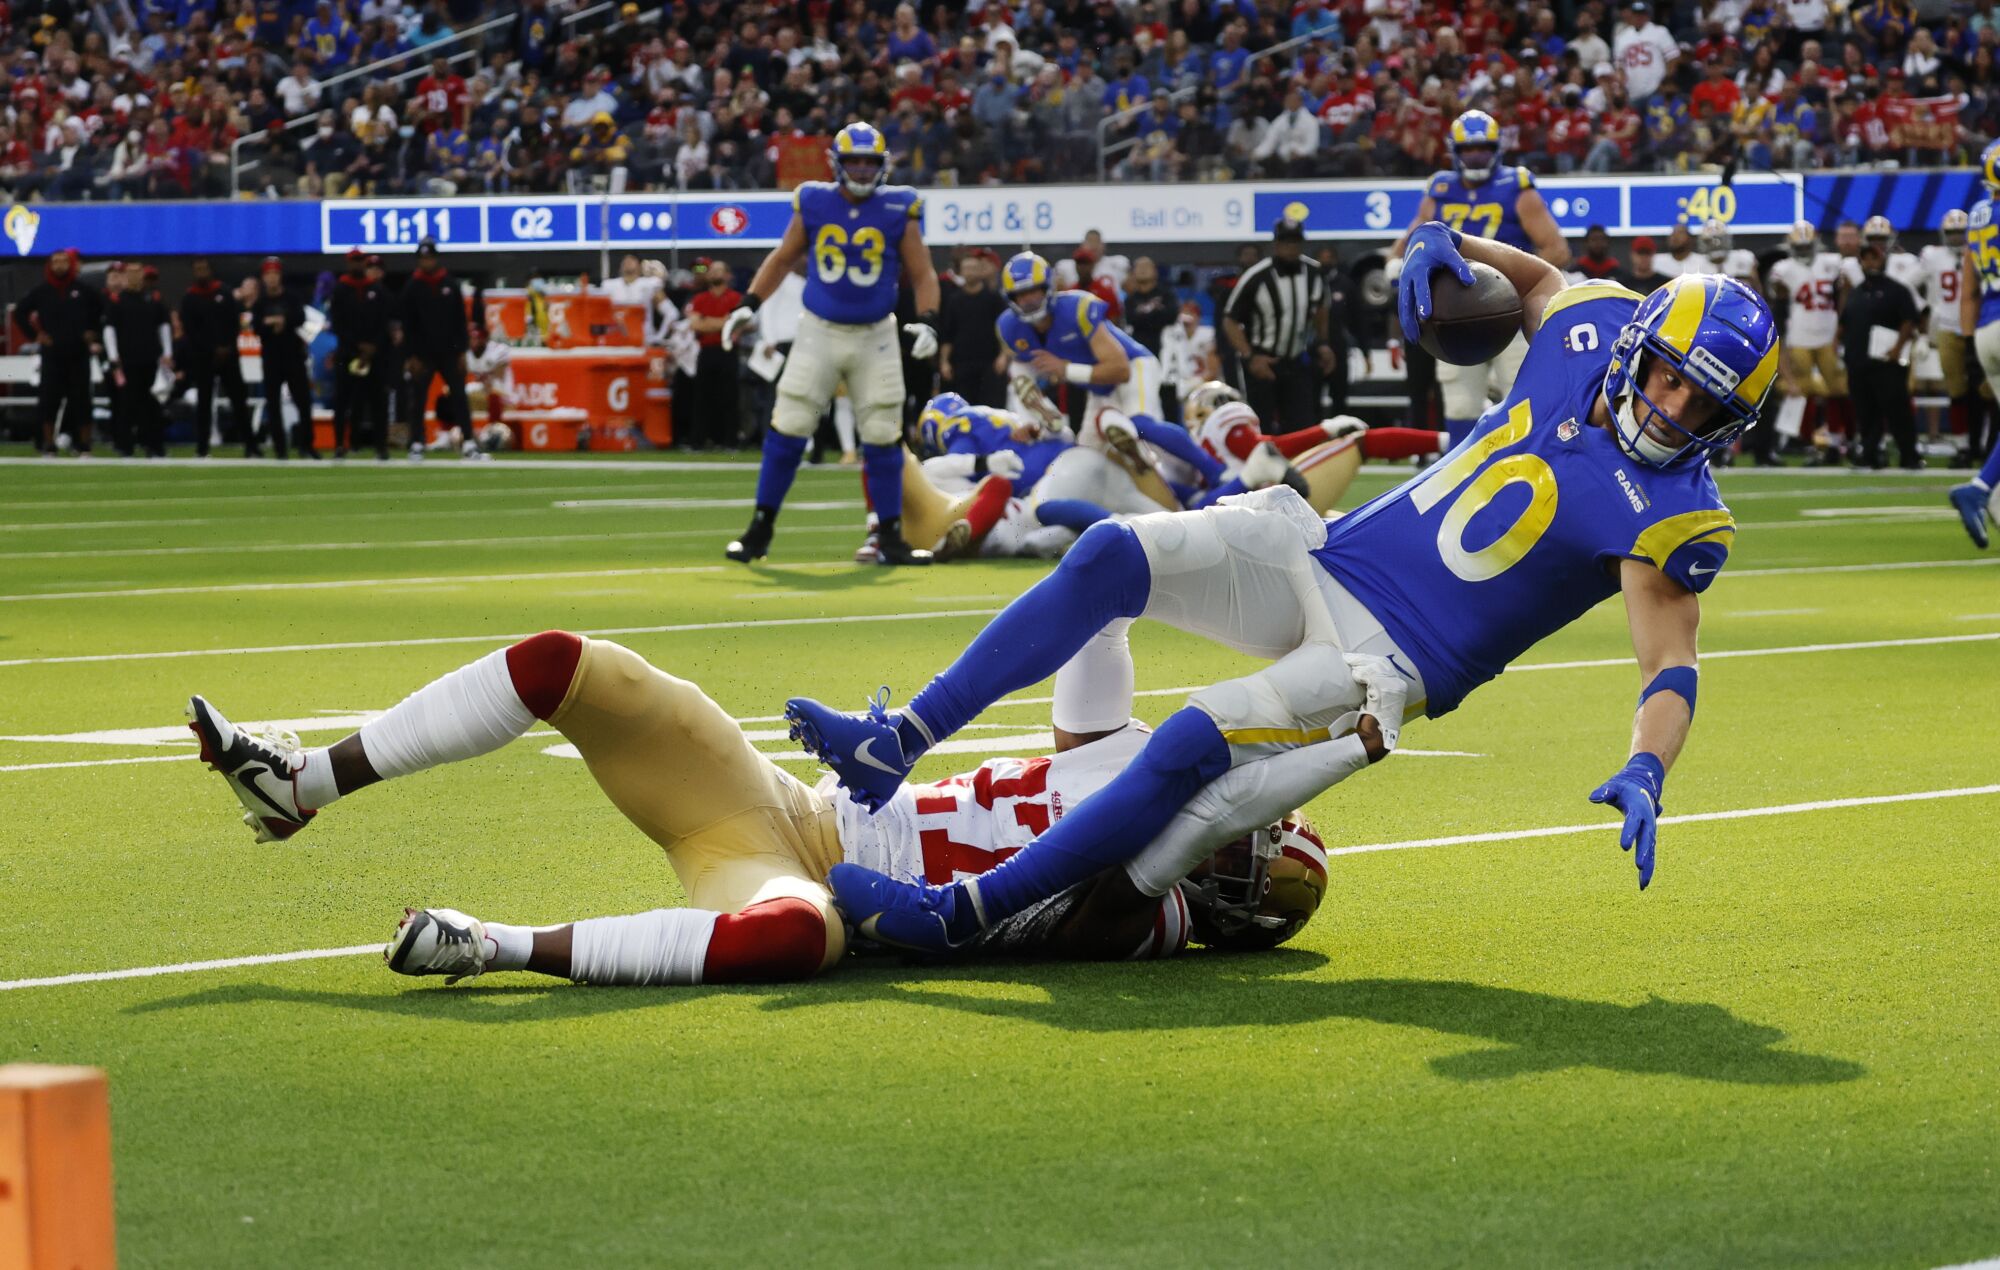 Rams receiver Cooper Kupp lurches for the end zone but comes up short while tackled by 49ers defensive back Dontae Johnson